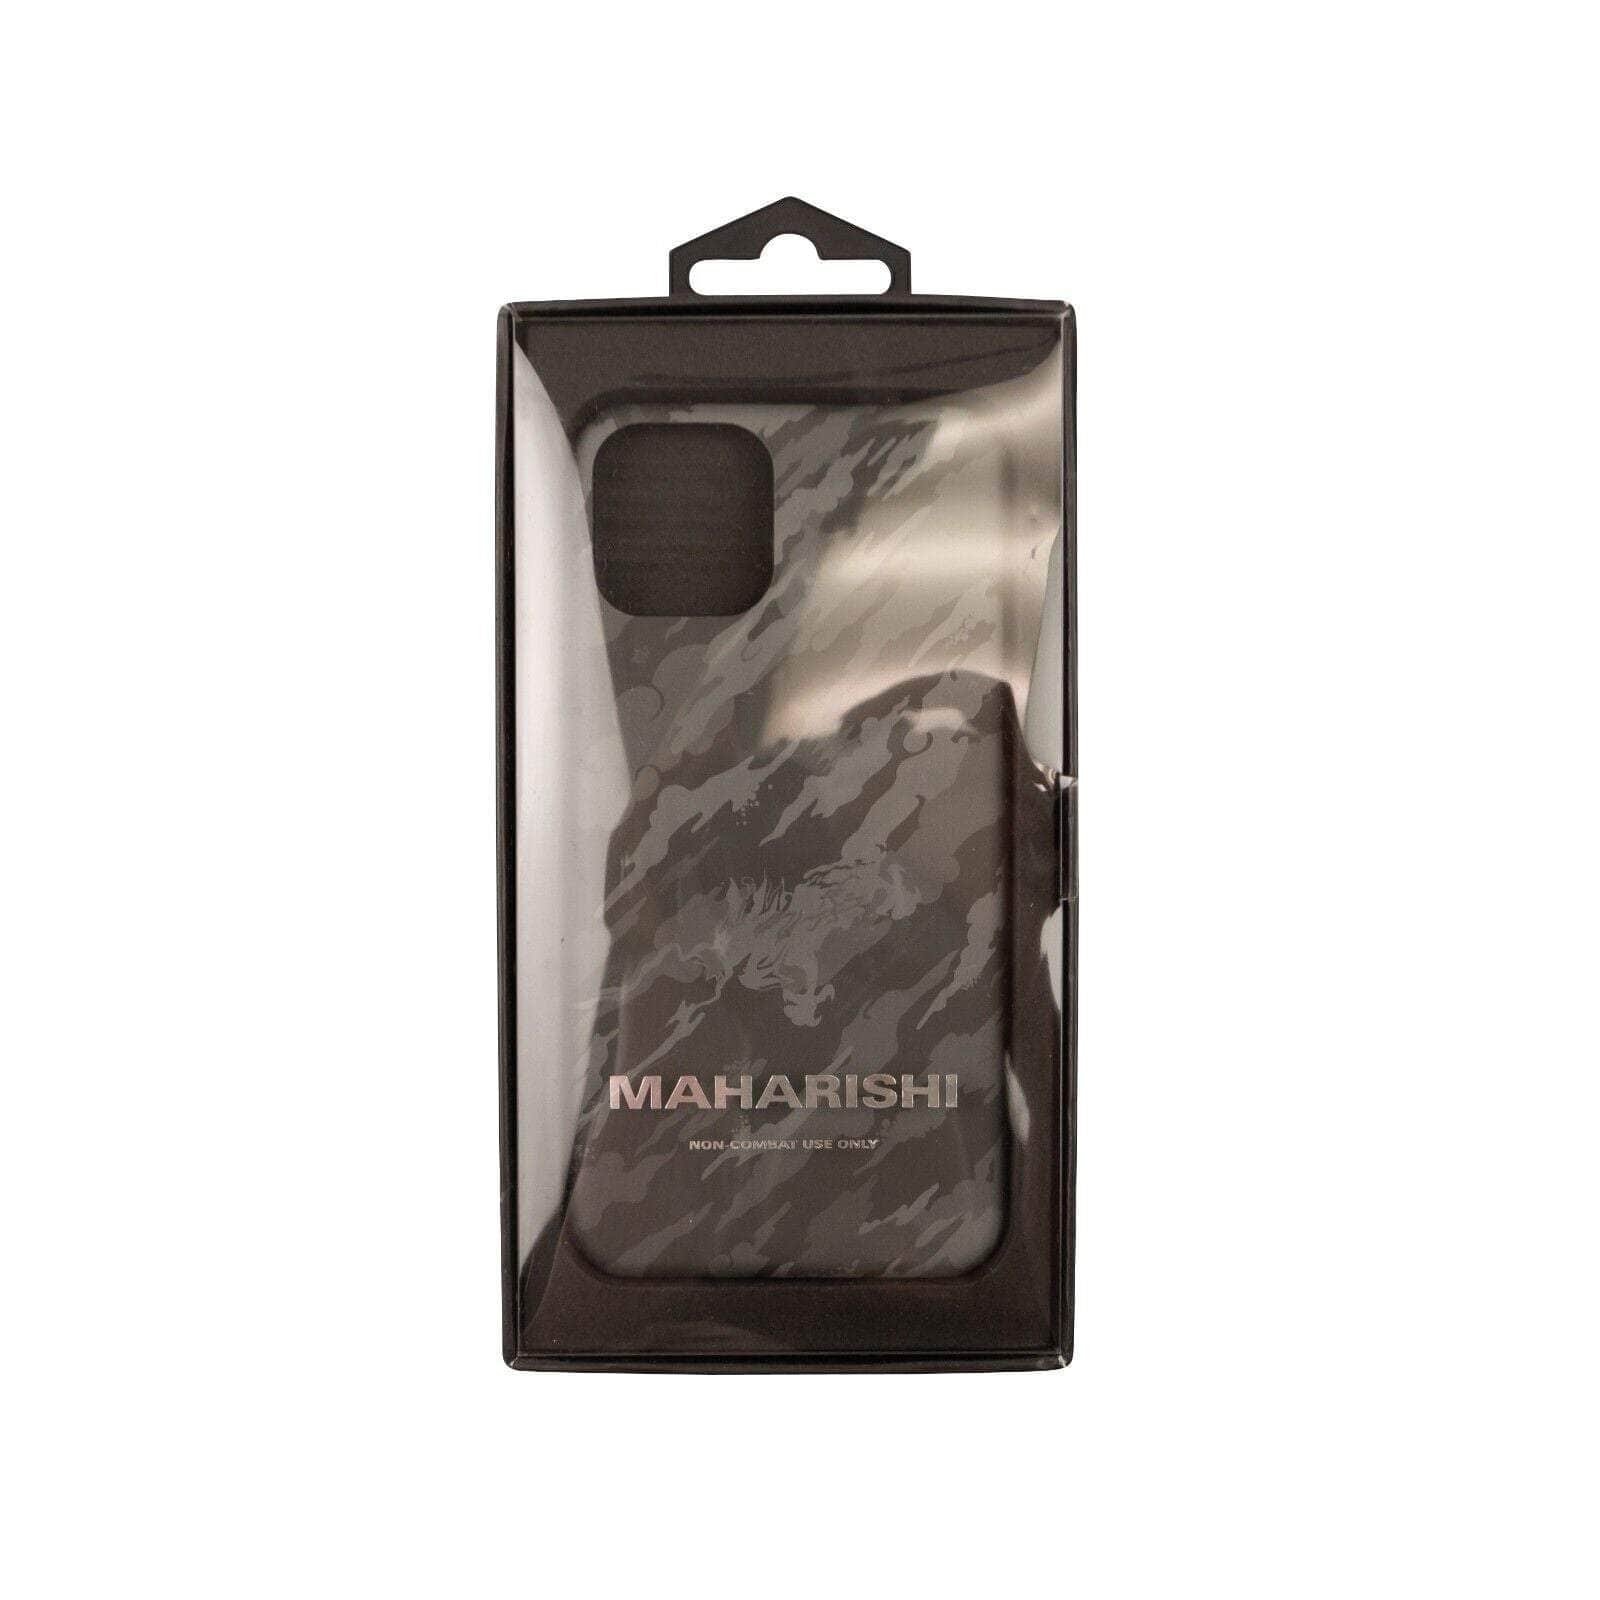 Maharishi couponcollection, gender-mens, gender-womens, maharishi, main-accessories, mens-shoes, size-os, tech-accessories, under-250 OS Grey Camo iPhone 11 Pro Phone Case 95-MSI-3001/OS 95-MSI-3001/OS